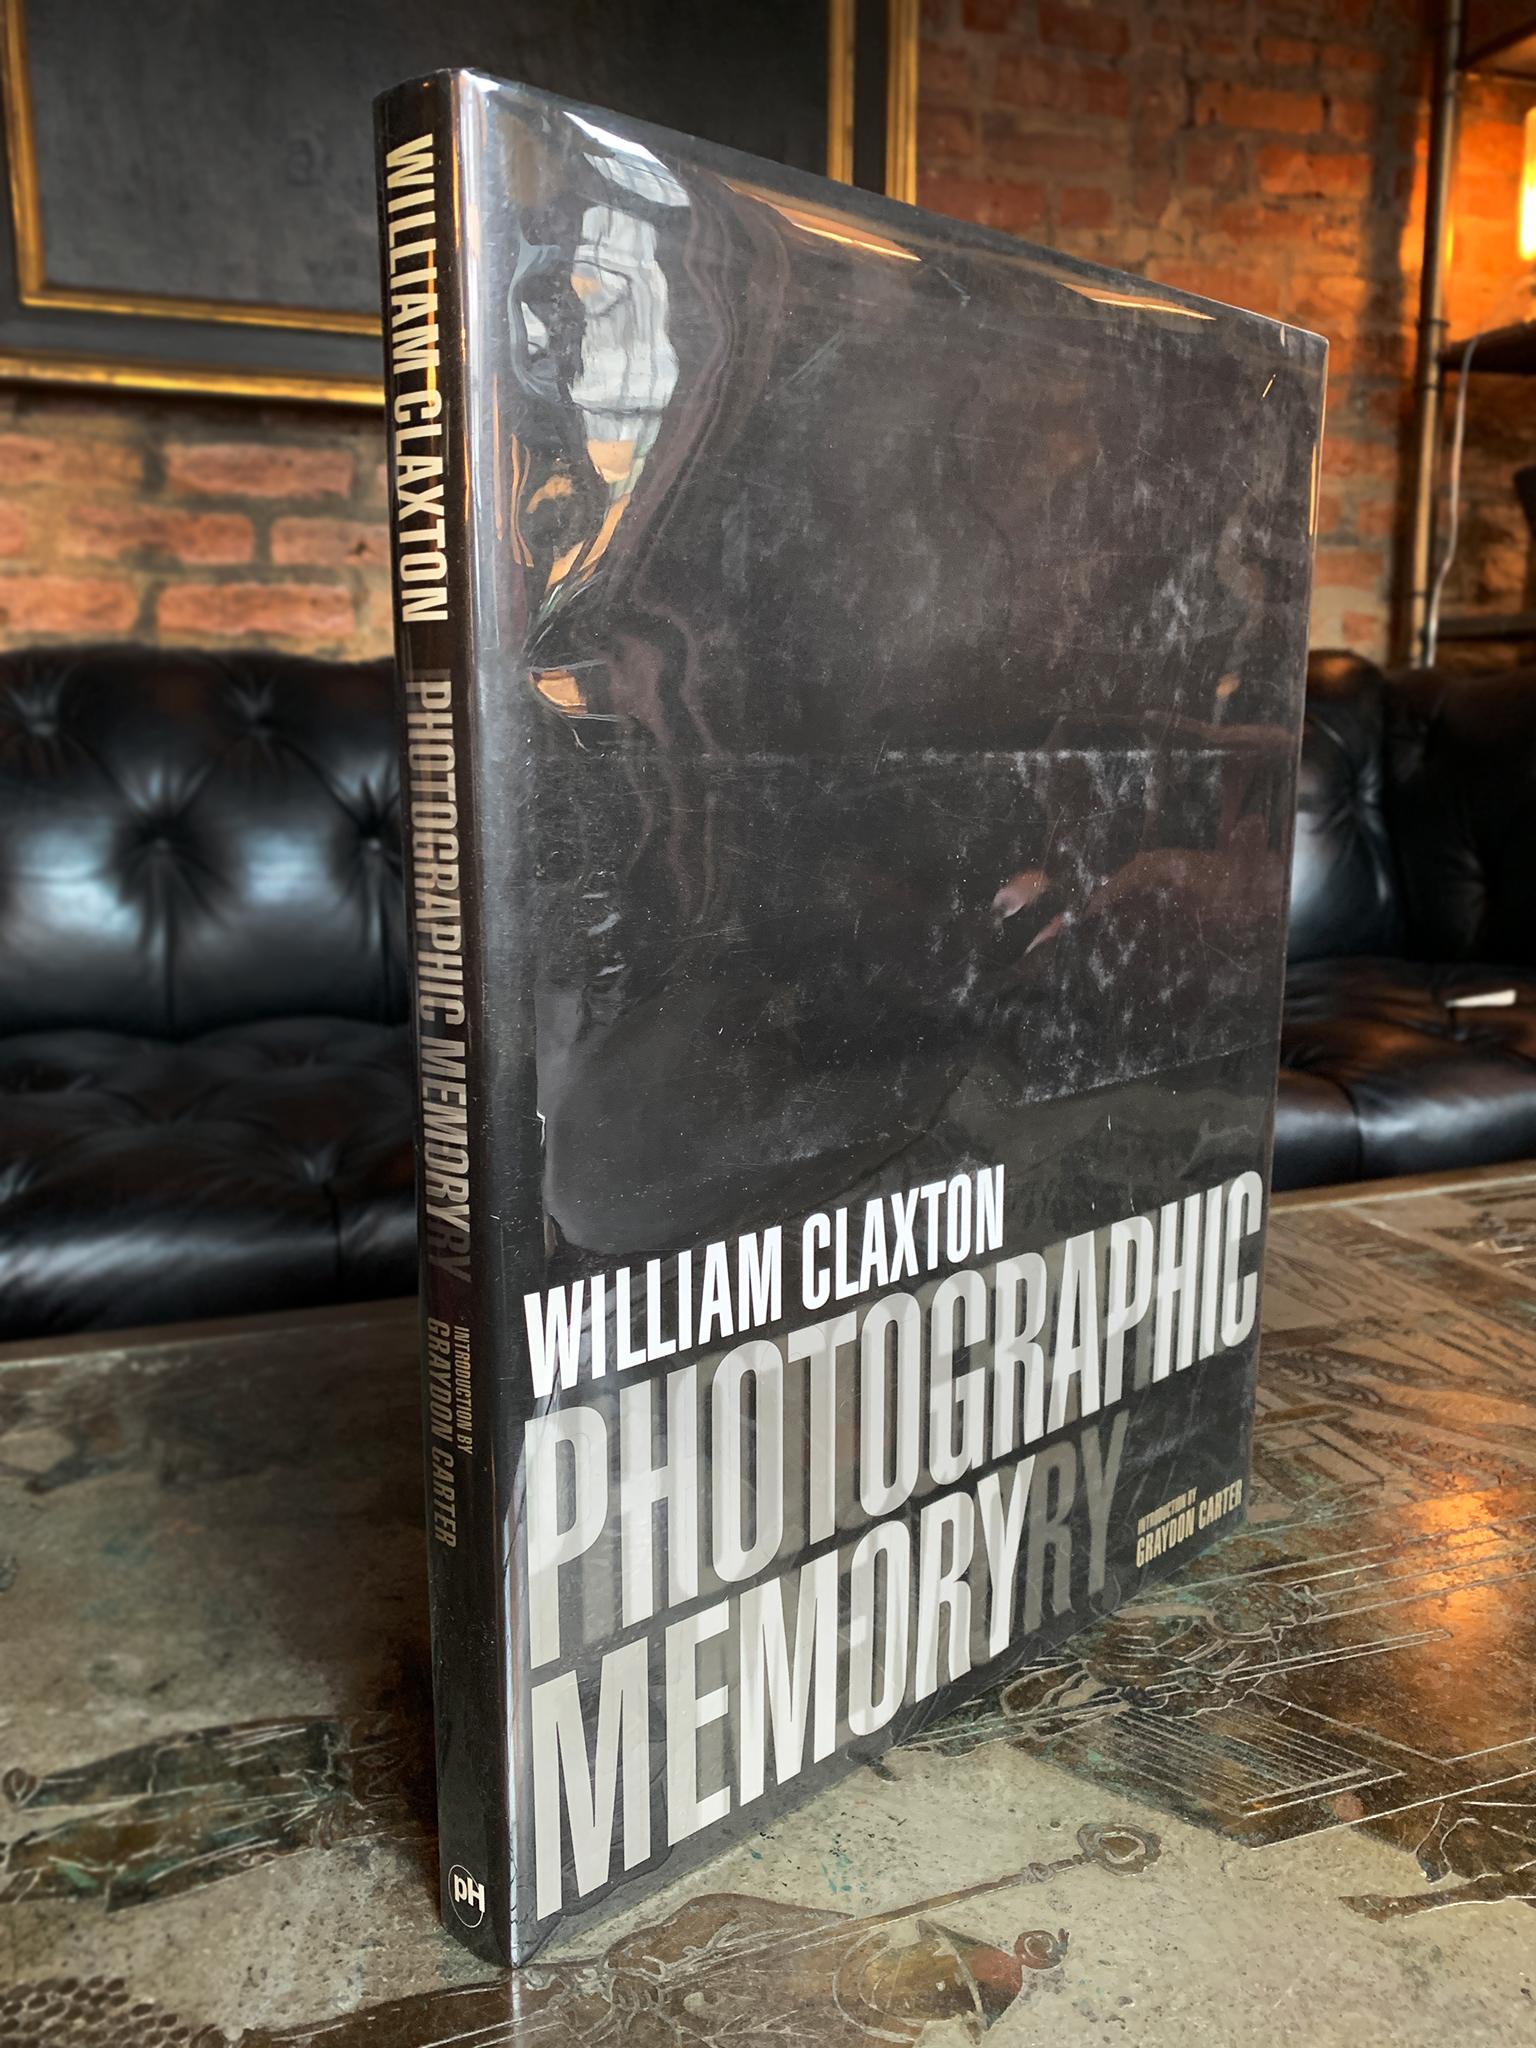 1st edition of William Claxton's monograph Photographic Memory. The book collects Claxton's portraits of iconic writers, musicians, actors, and celebrities. The 115 duotone photos emerge from intimate moments the photographer spent with these